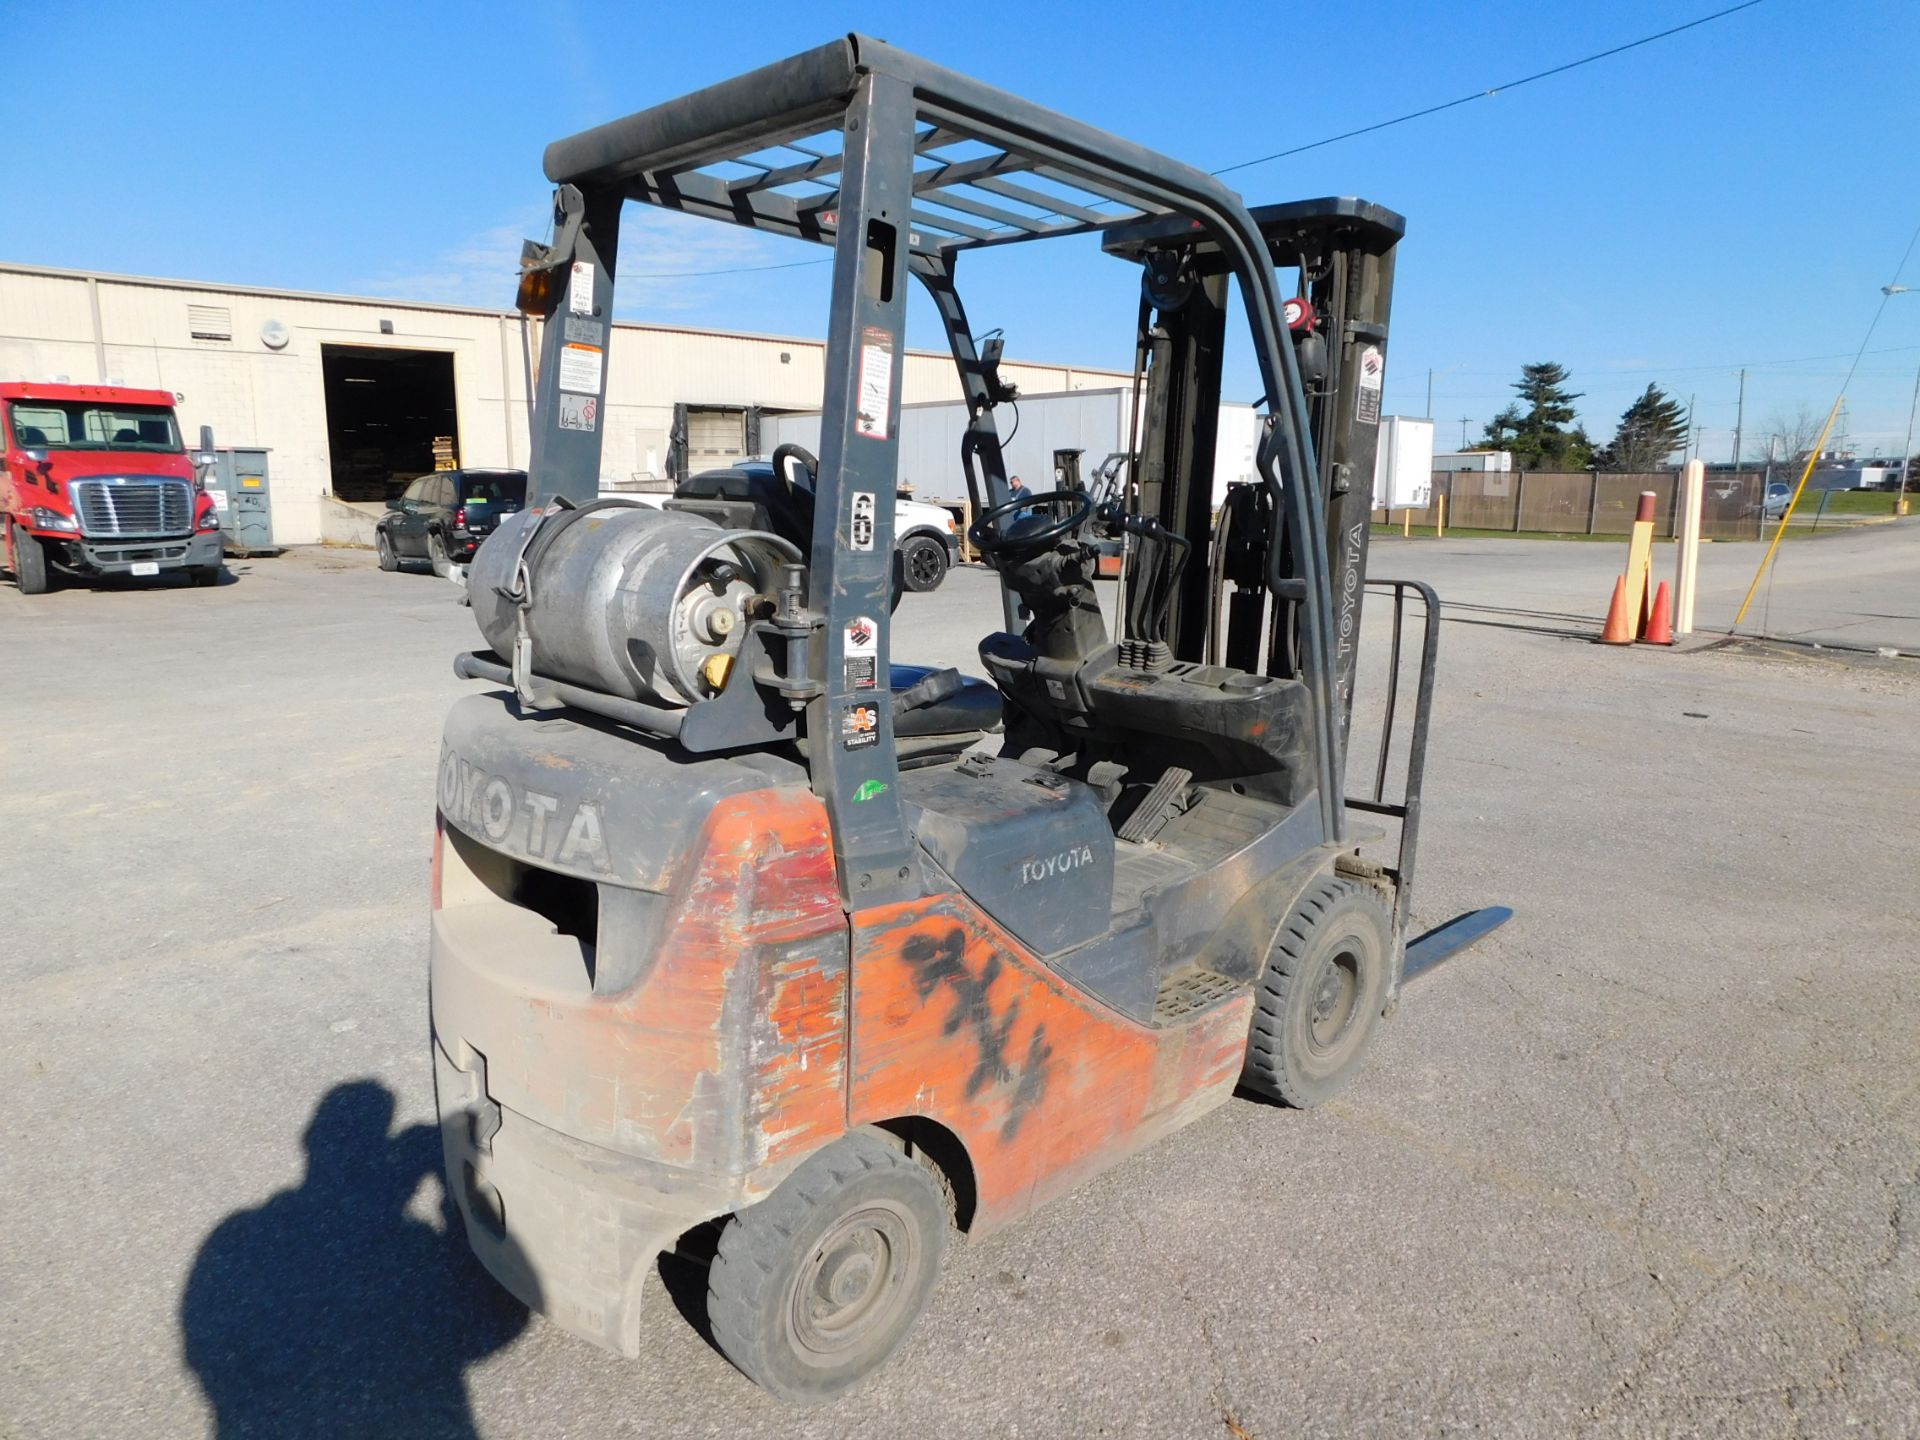 Toyota 8FGU15 Fork Lift Truck, SN 64658, 2,500 lb. Max. Load Capacity, LP Gas Engine, Overhead - Image 7 of 21